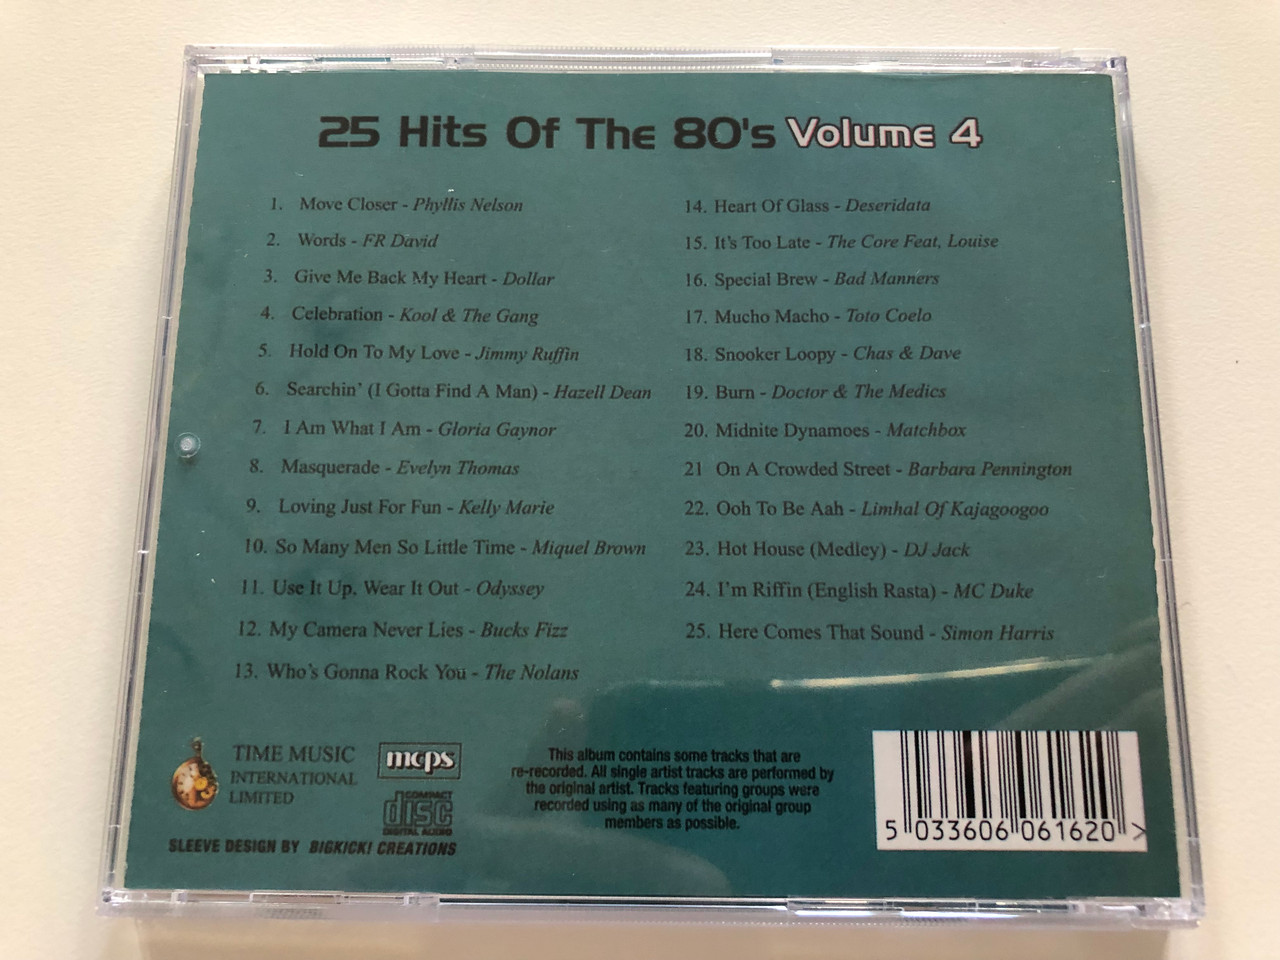 https://cdn10.bigcommerce.com/s-62bdpkt7pb/products/31173/images/183514/25_Hits_Of_The_80s_-_Volume_4_Featuring_Doctor_The_Medics_Odyssey_Barbara_Pennington_Hezell_Dean_and_many_more_Time_Music_International_Audio_CD_2001_TMI616_4__26618.1625602652.1280.1280.JPG?c=2